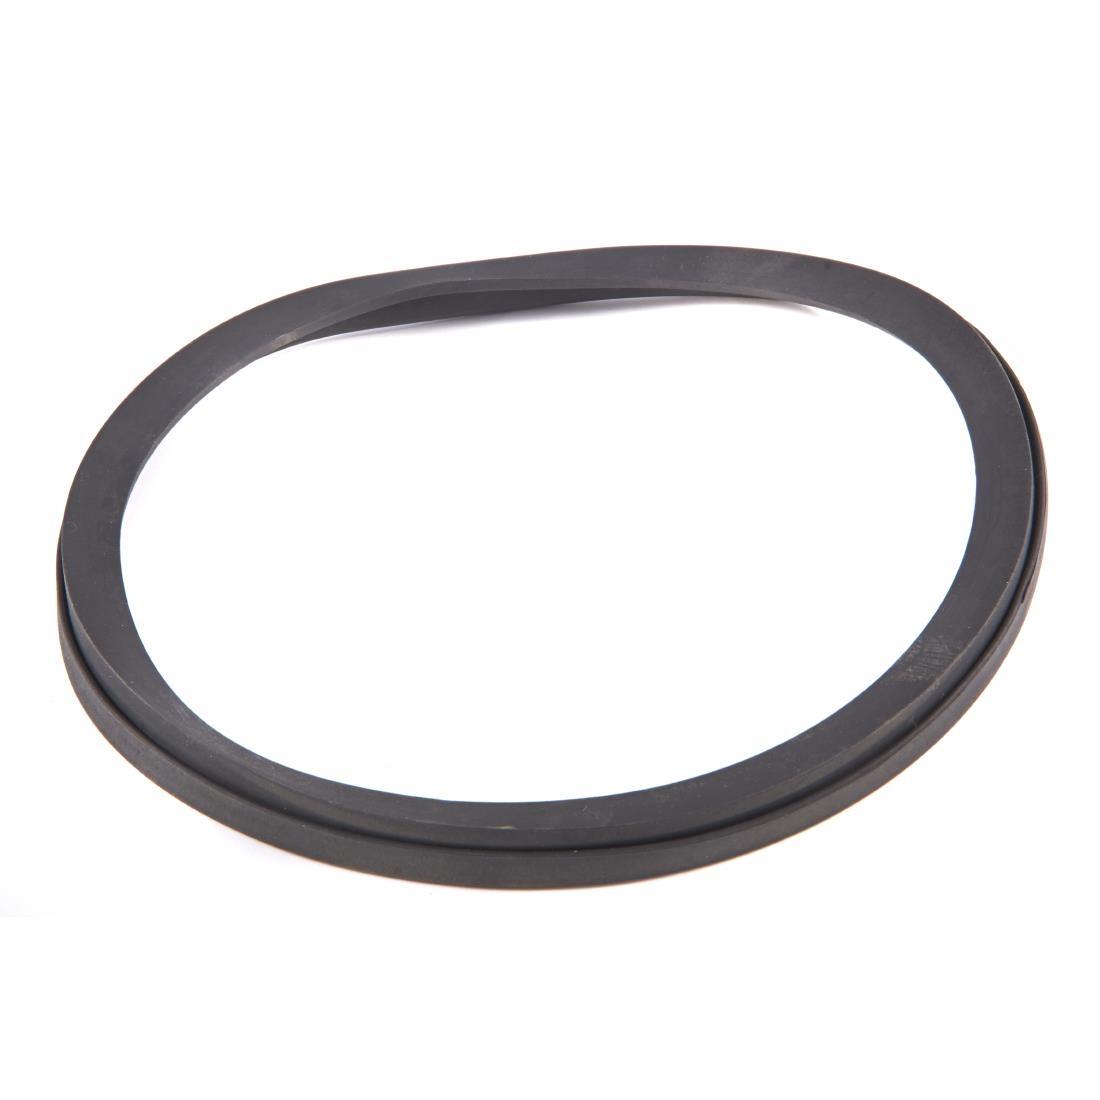 Gasket for St/St Outer Lid for F135 WA446  WA199